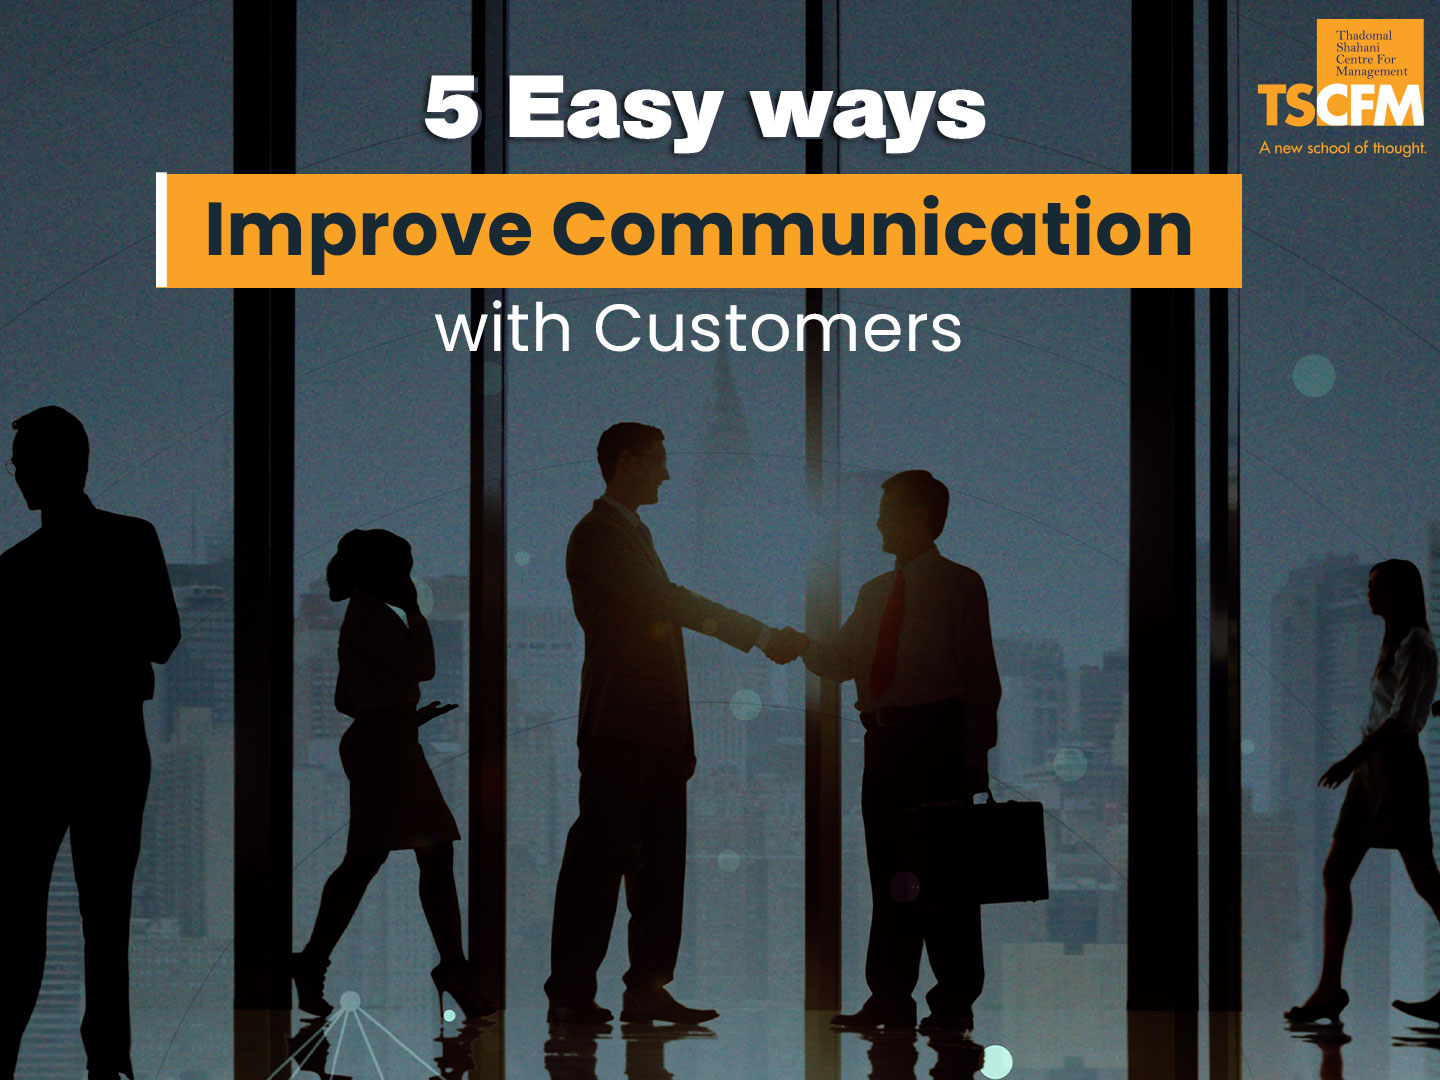 How to communicate effectively with customers at banks?